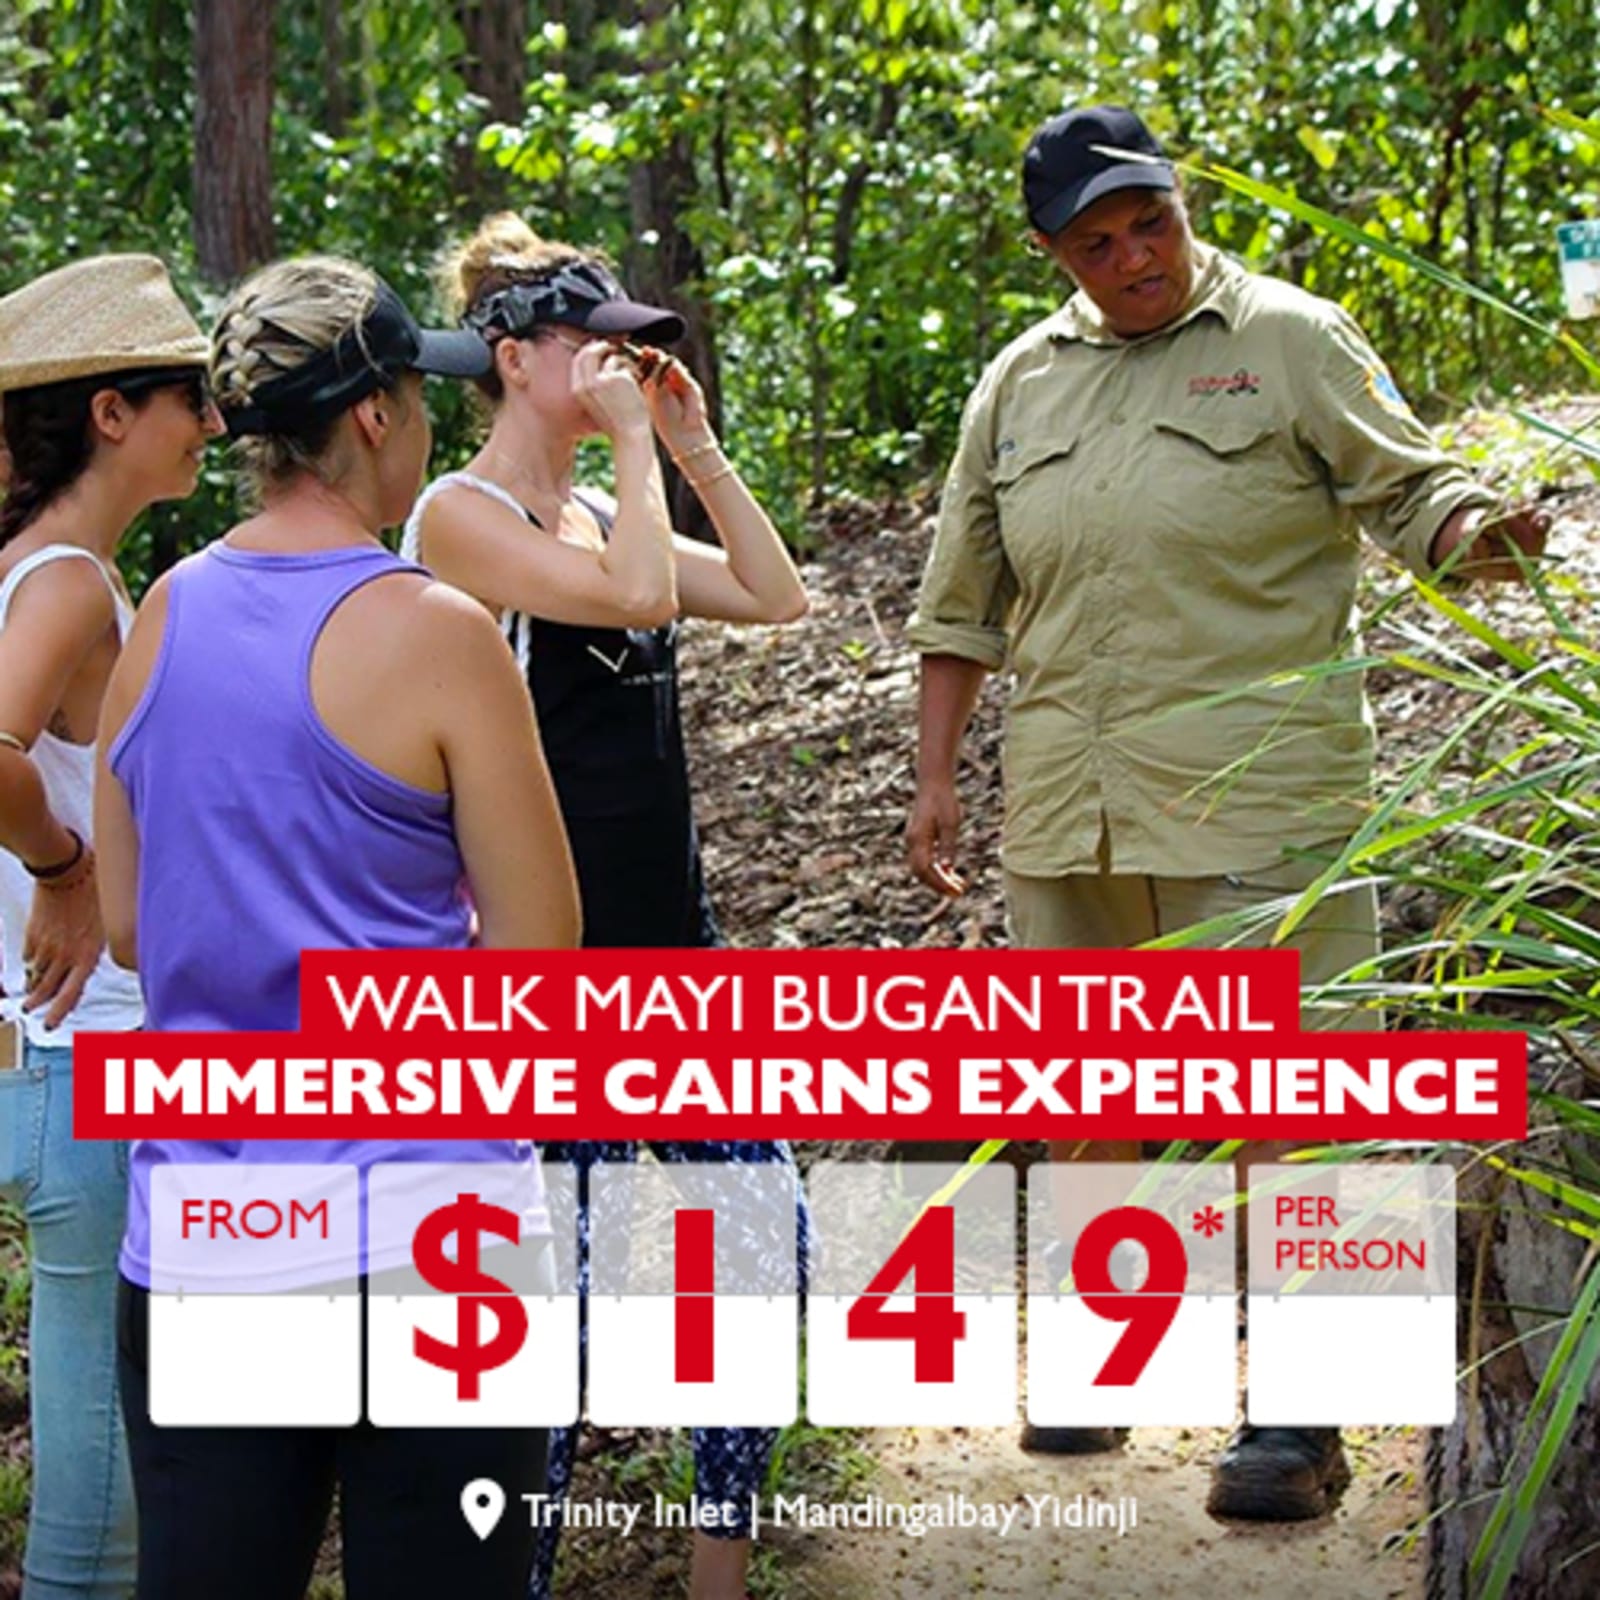 Walk Mayi Bugan Trail | Immersive Cairns Experience from $149* per person